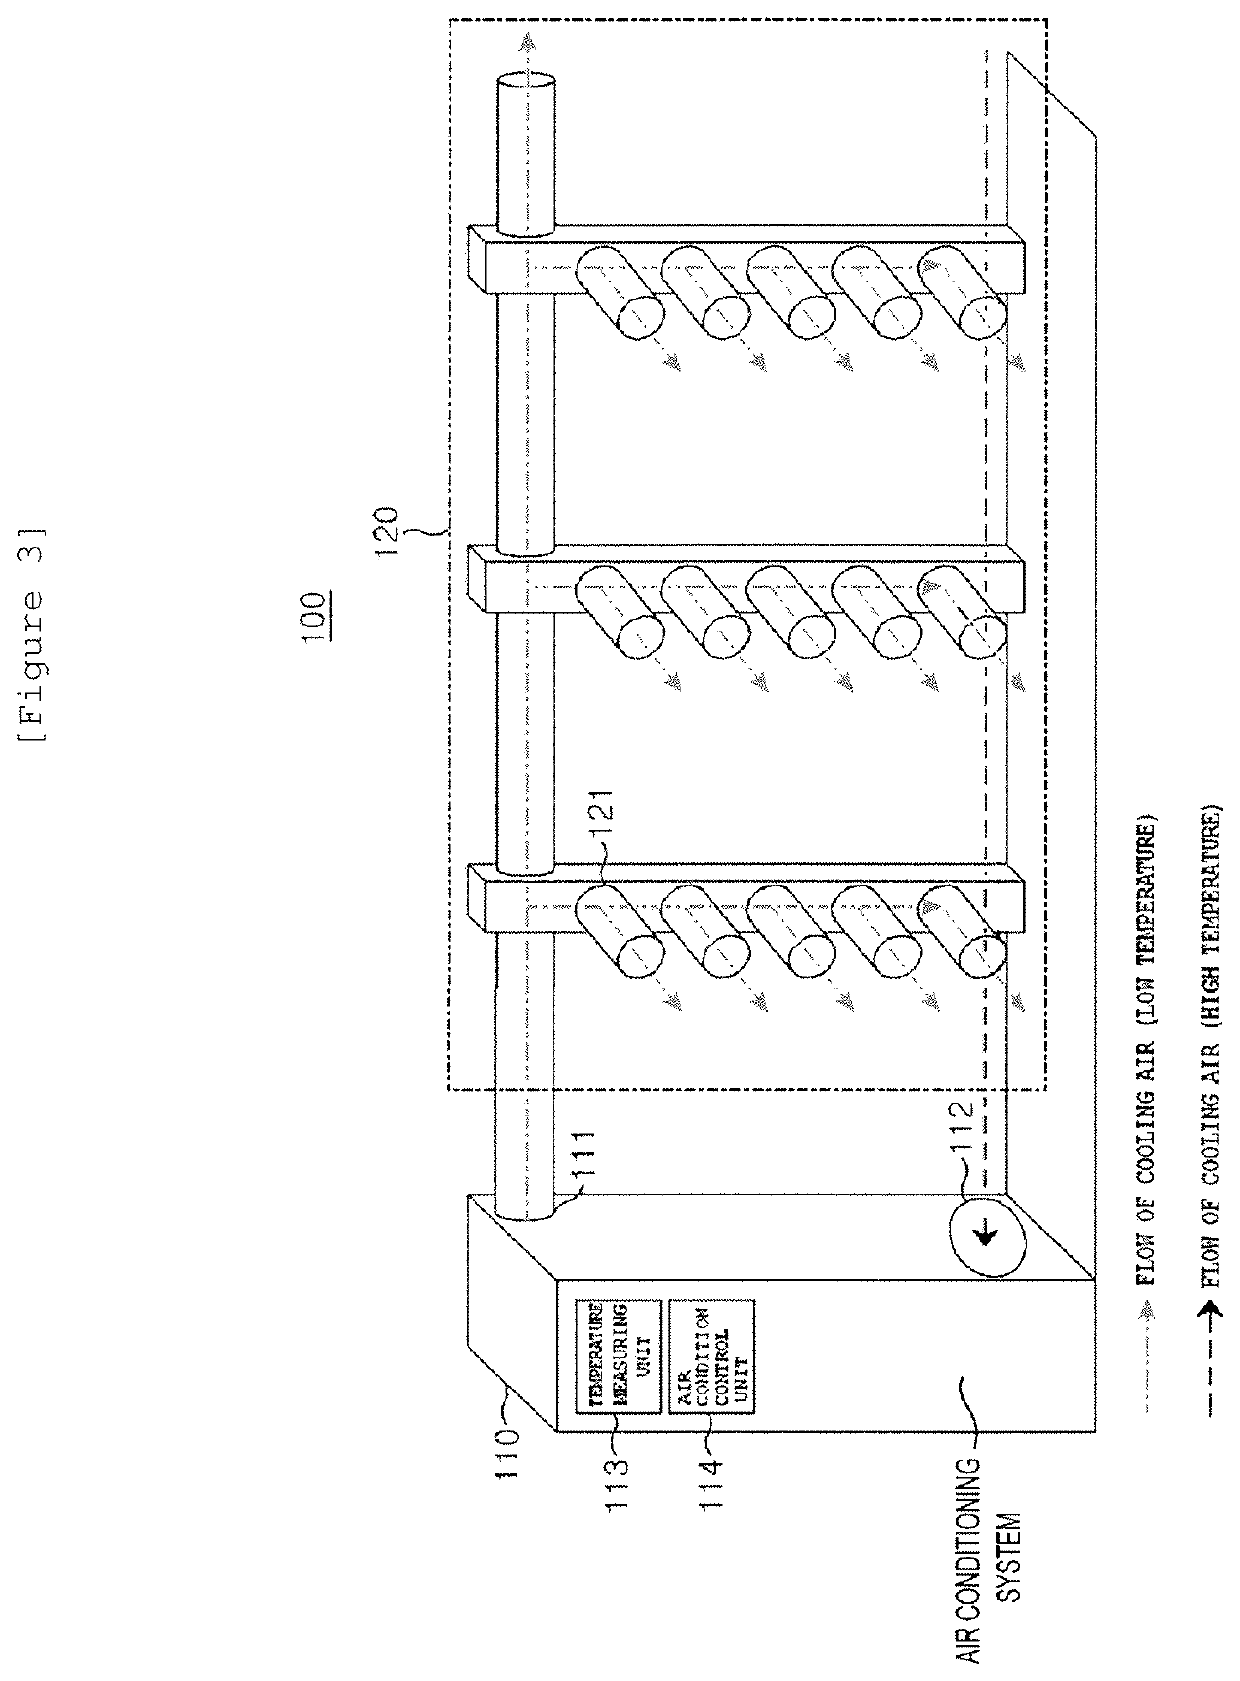 System for providing cooling air in a battery system